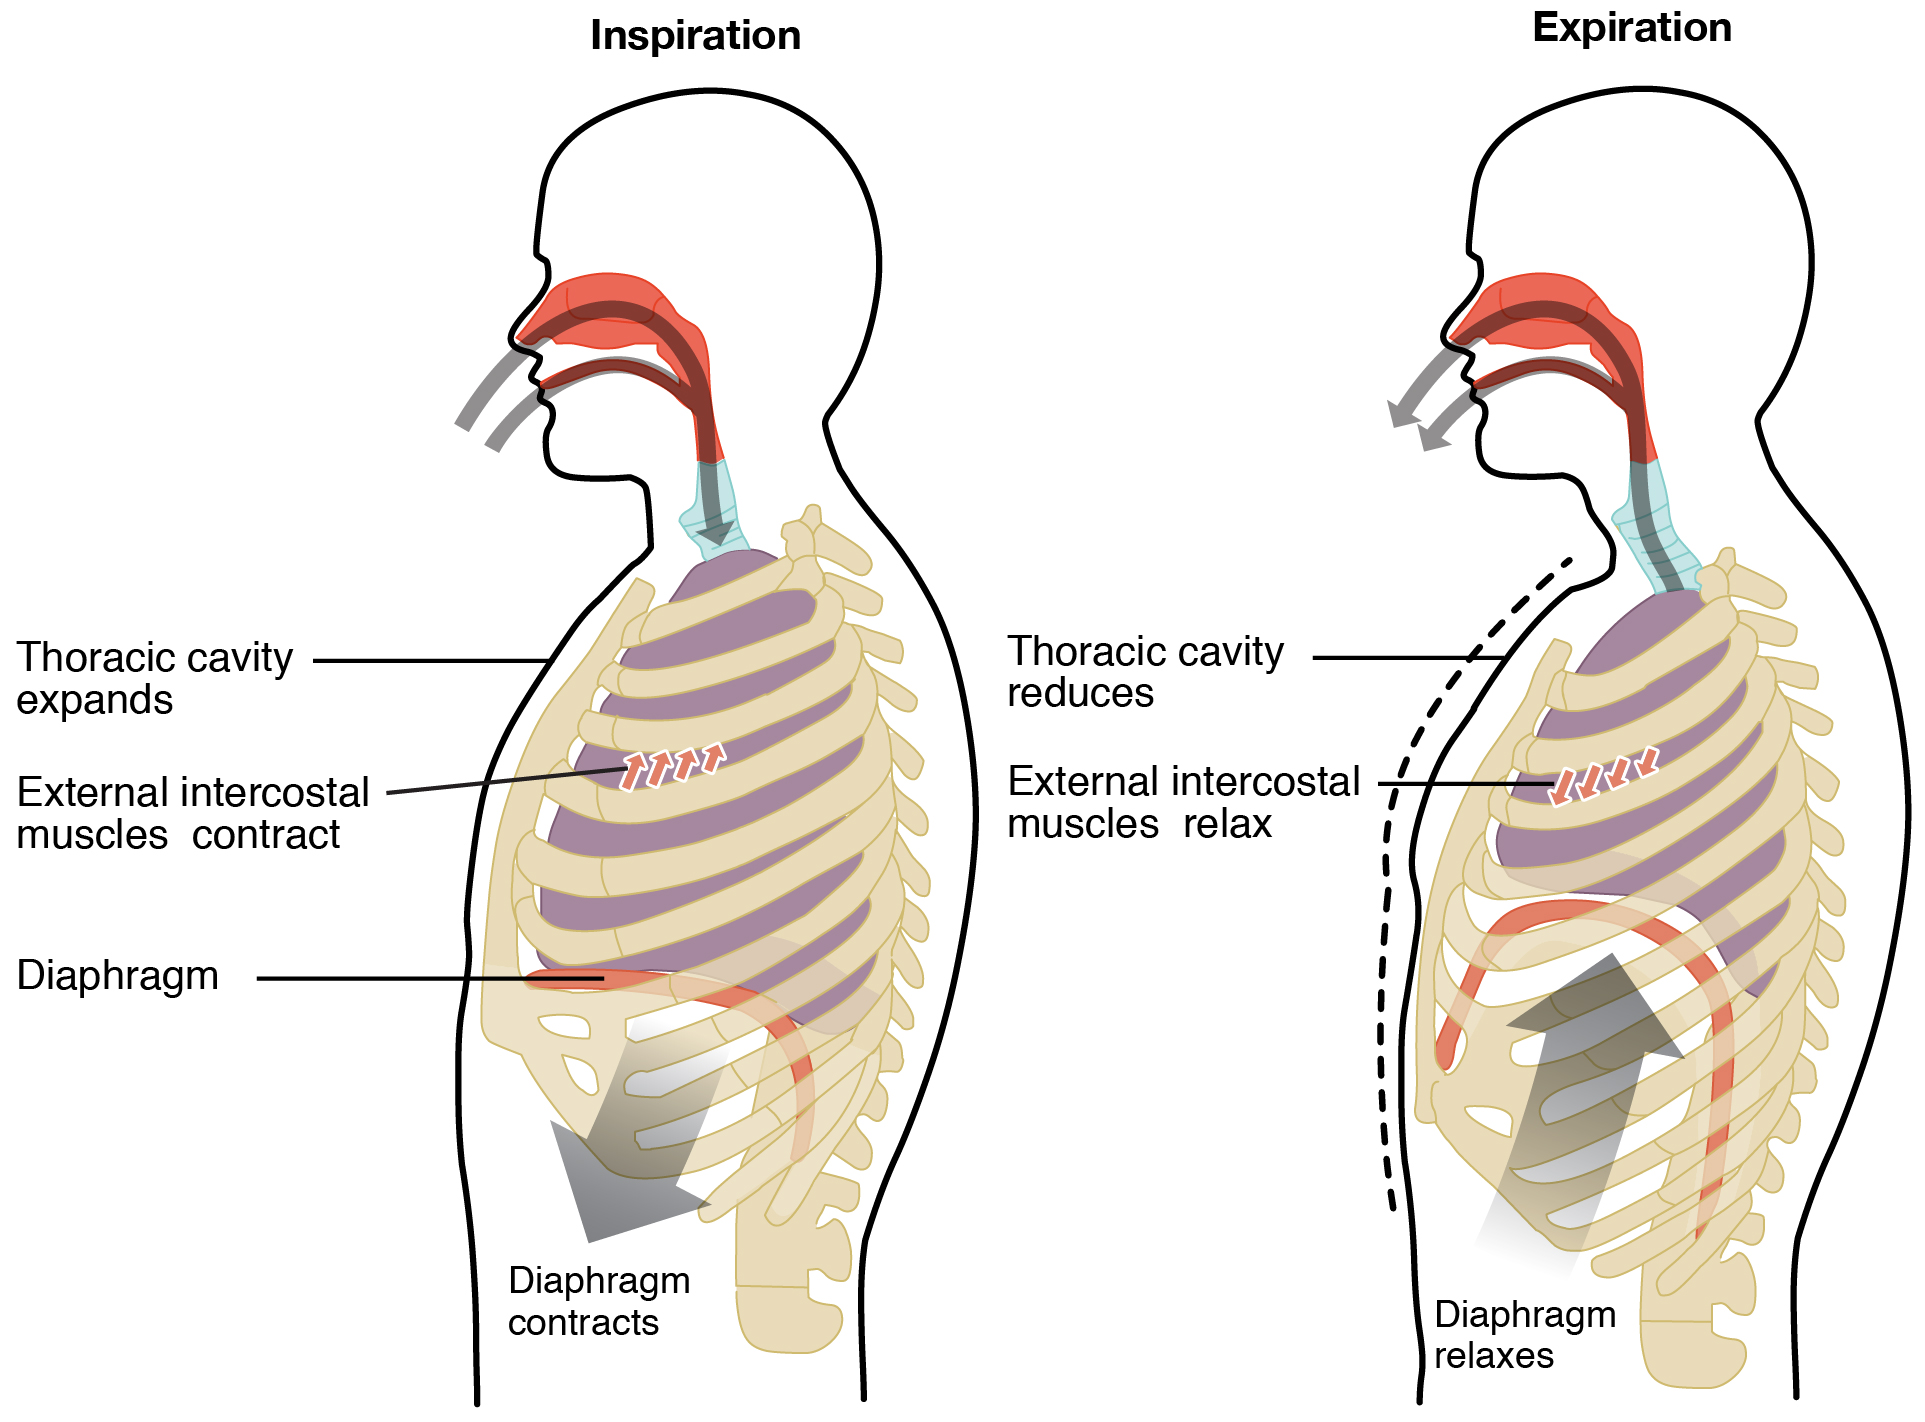 Paradoxical Breathing: Definition, Causes and Treatments | New Health